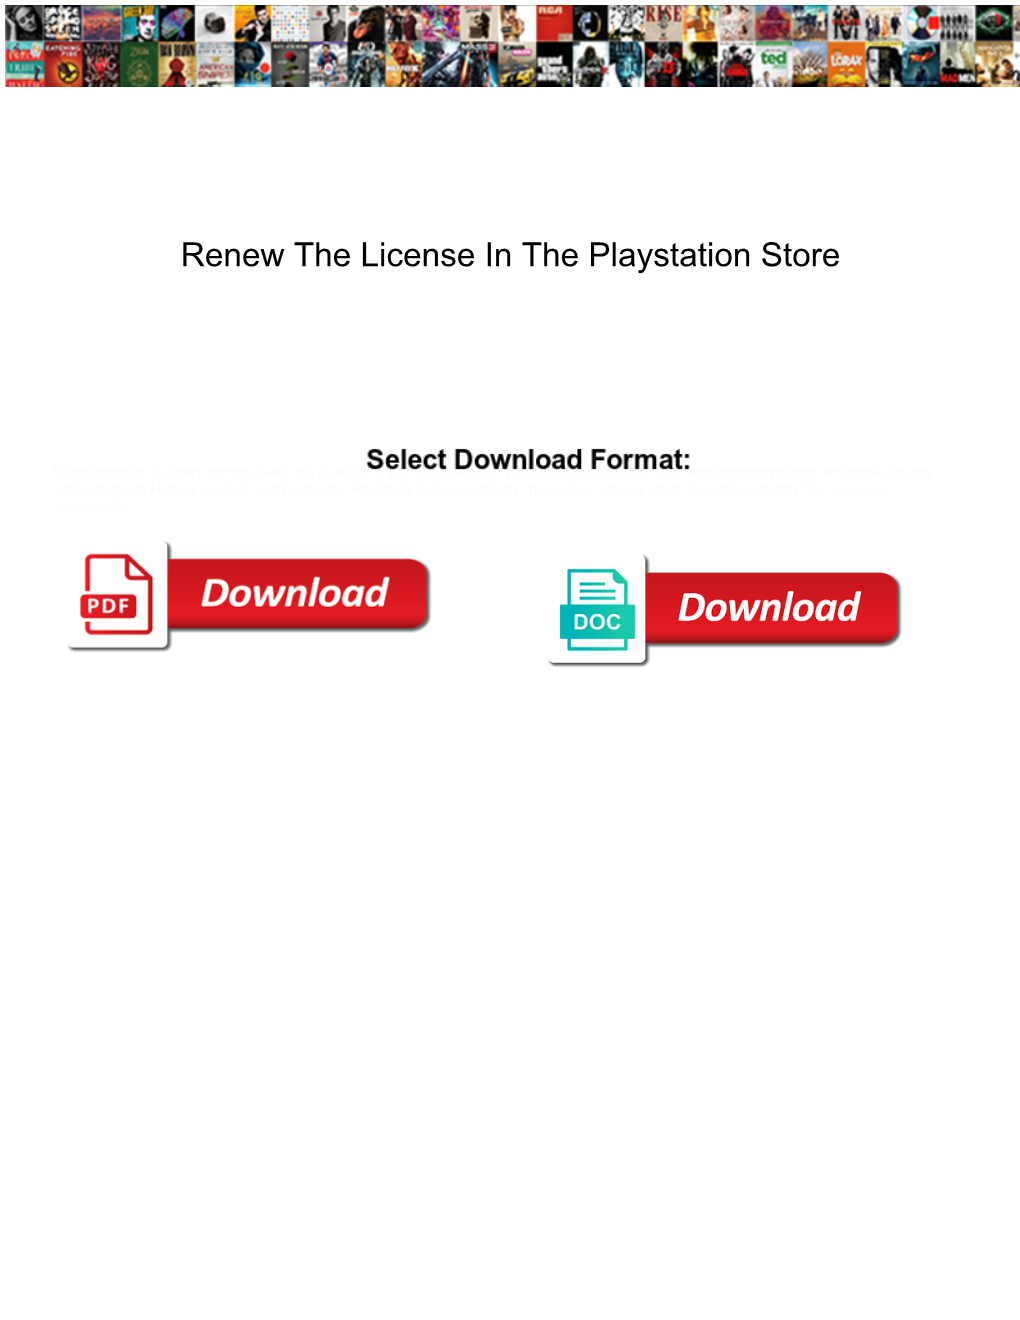 Renew the License in the Playstation Store